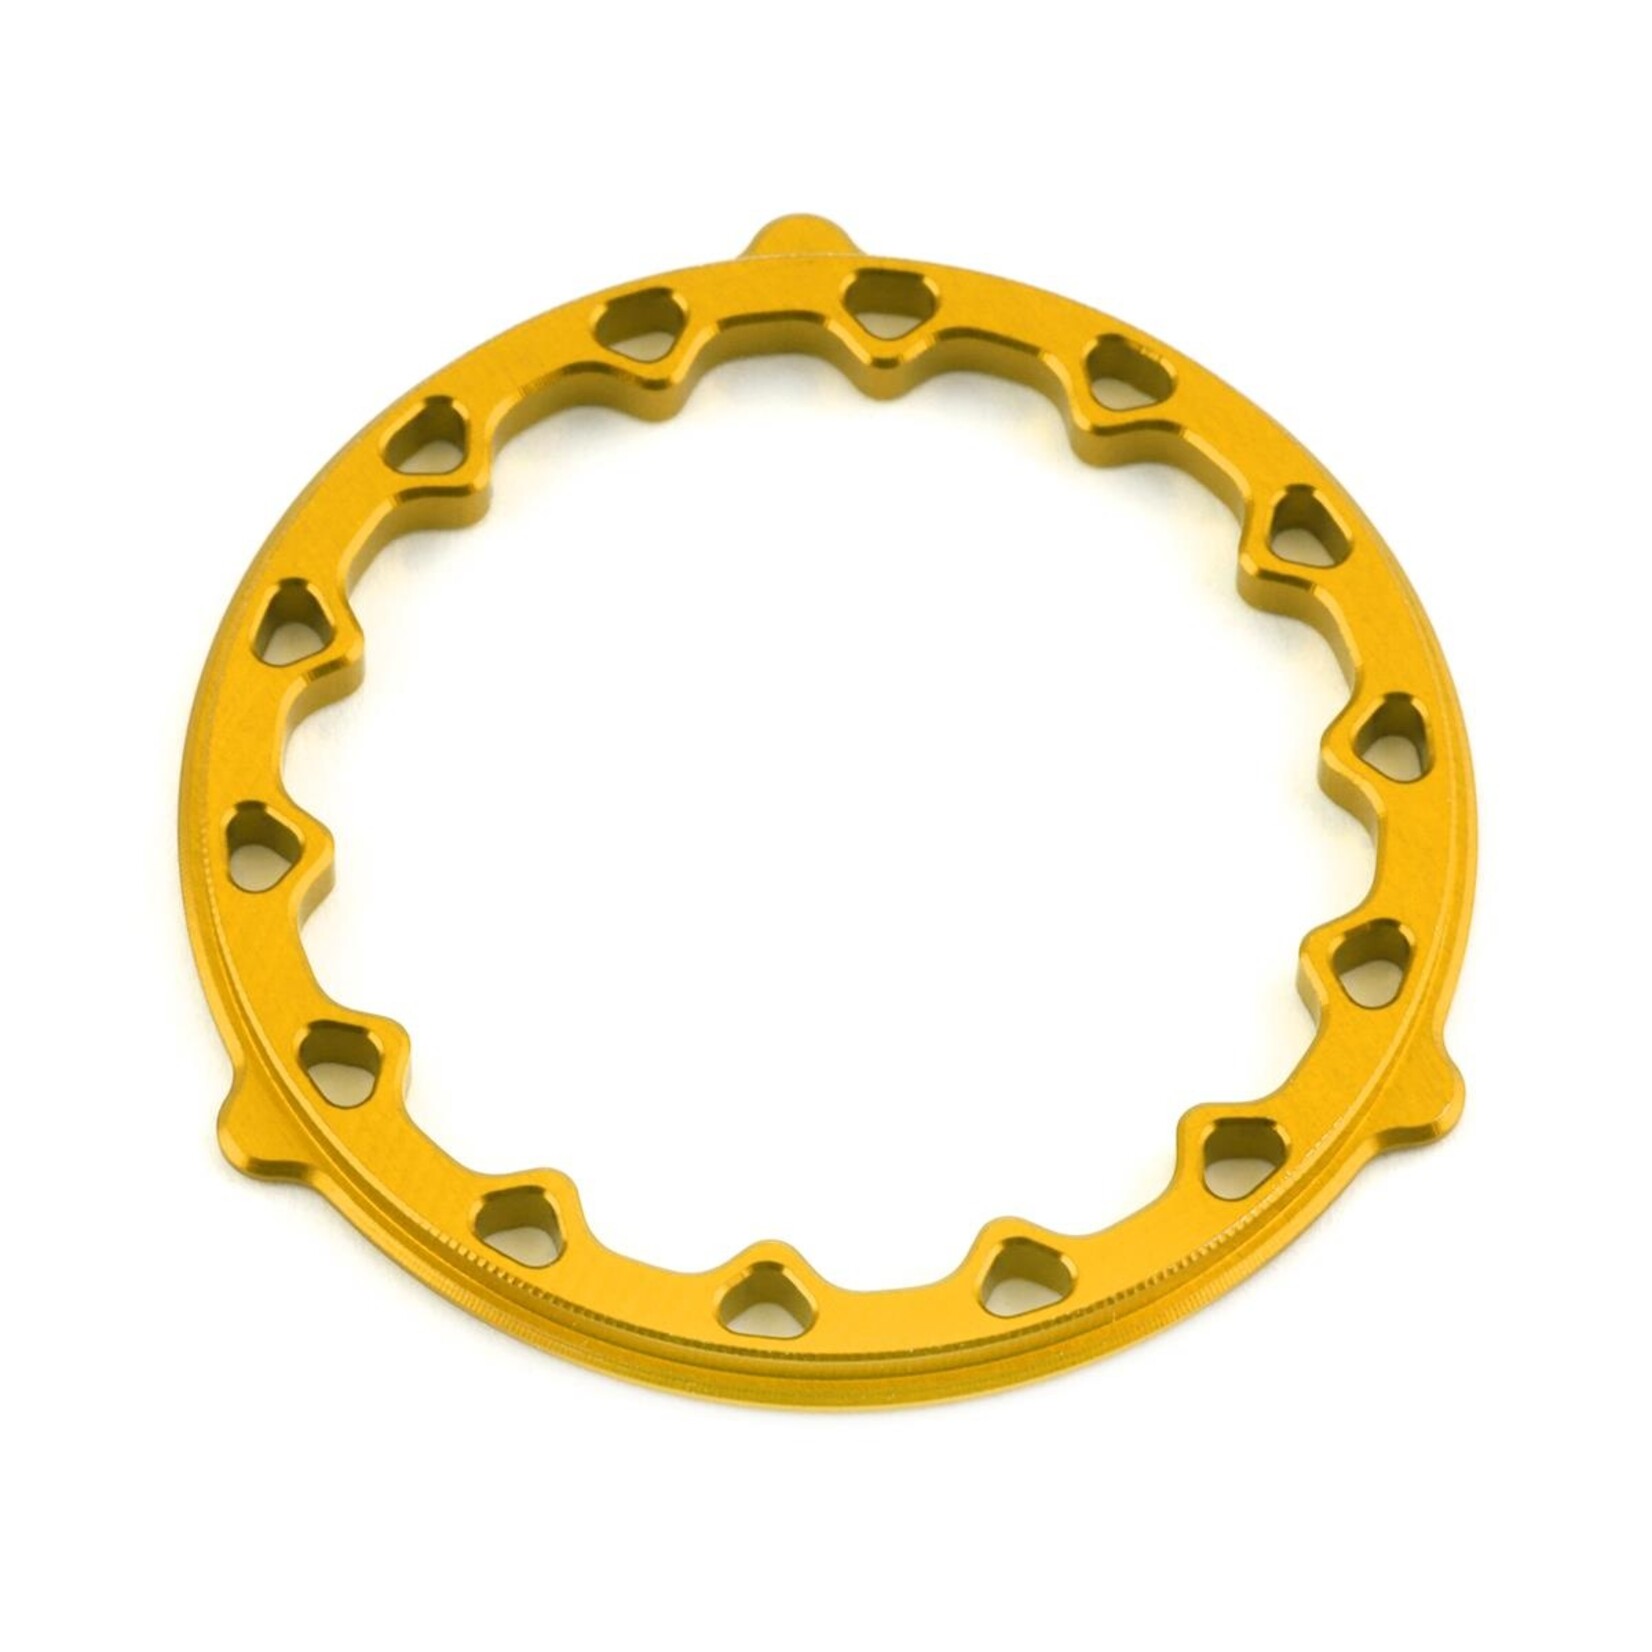 Vanquish Products Vanquish Products 1.9" Delta IFR Inner Ring (Gold) #VPS05457